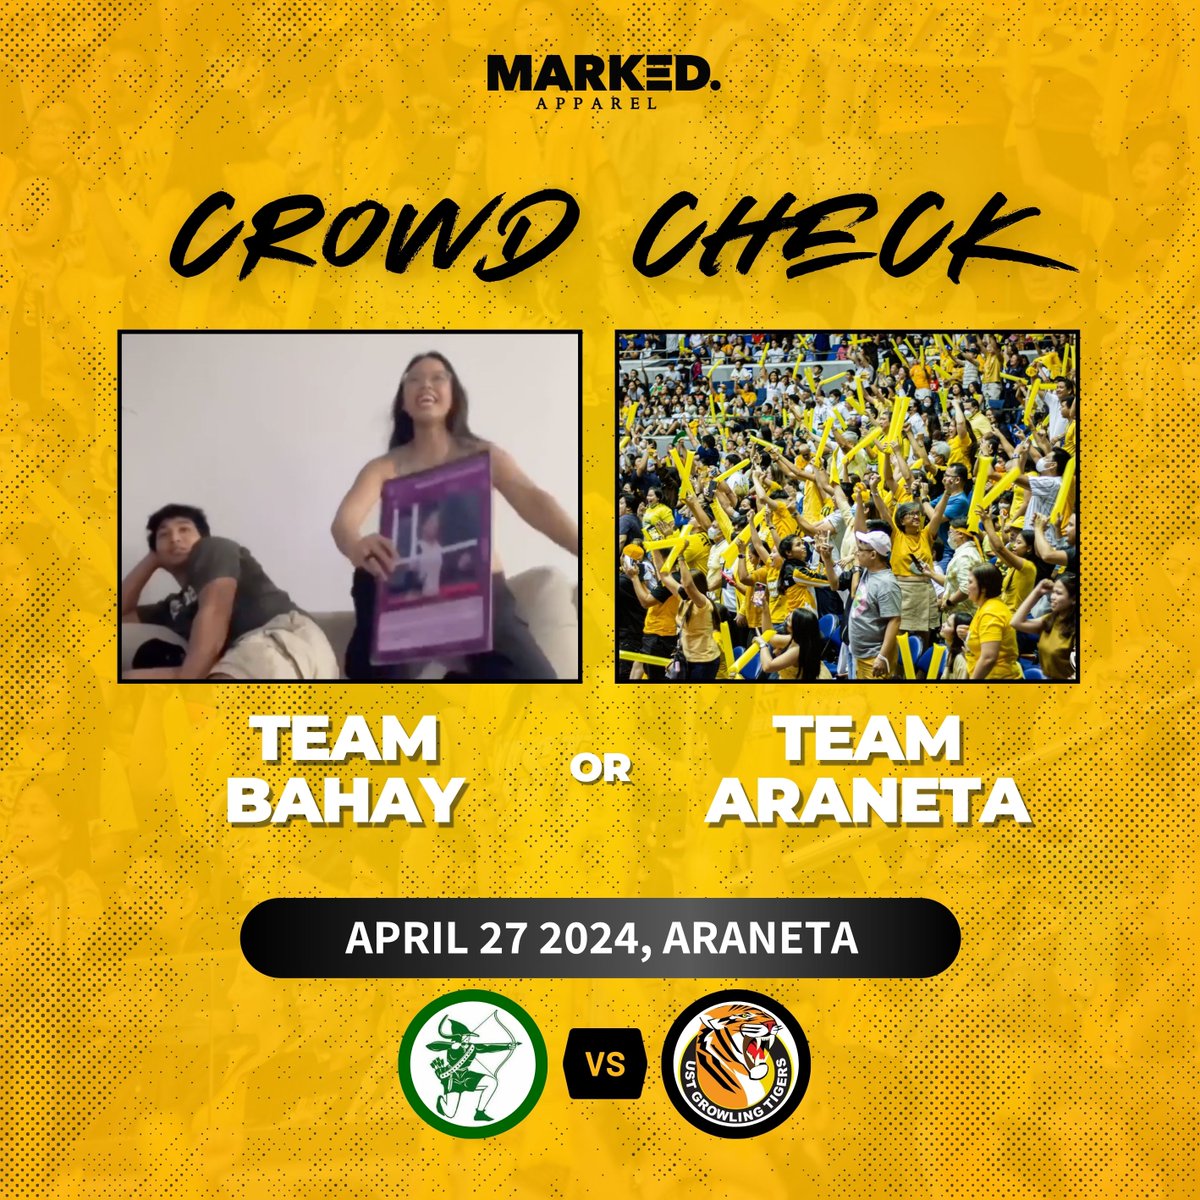 Are you Team Bahay or Team Araneta?

Wherever you're cheering from, let's rally our prayers and passion for our beloved Golden Tigresses! Only one day left until the epic clash ignites in the ultimate UST - DLSU showdown! 🐯💛

#GoldenTigresses #USTvsDLSU #GoUSTe #GetMarkedNow